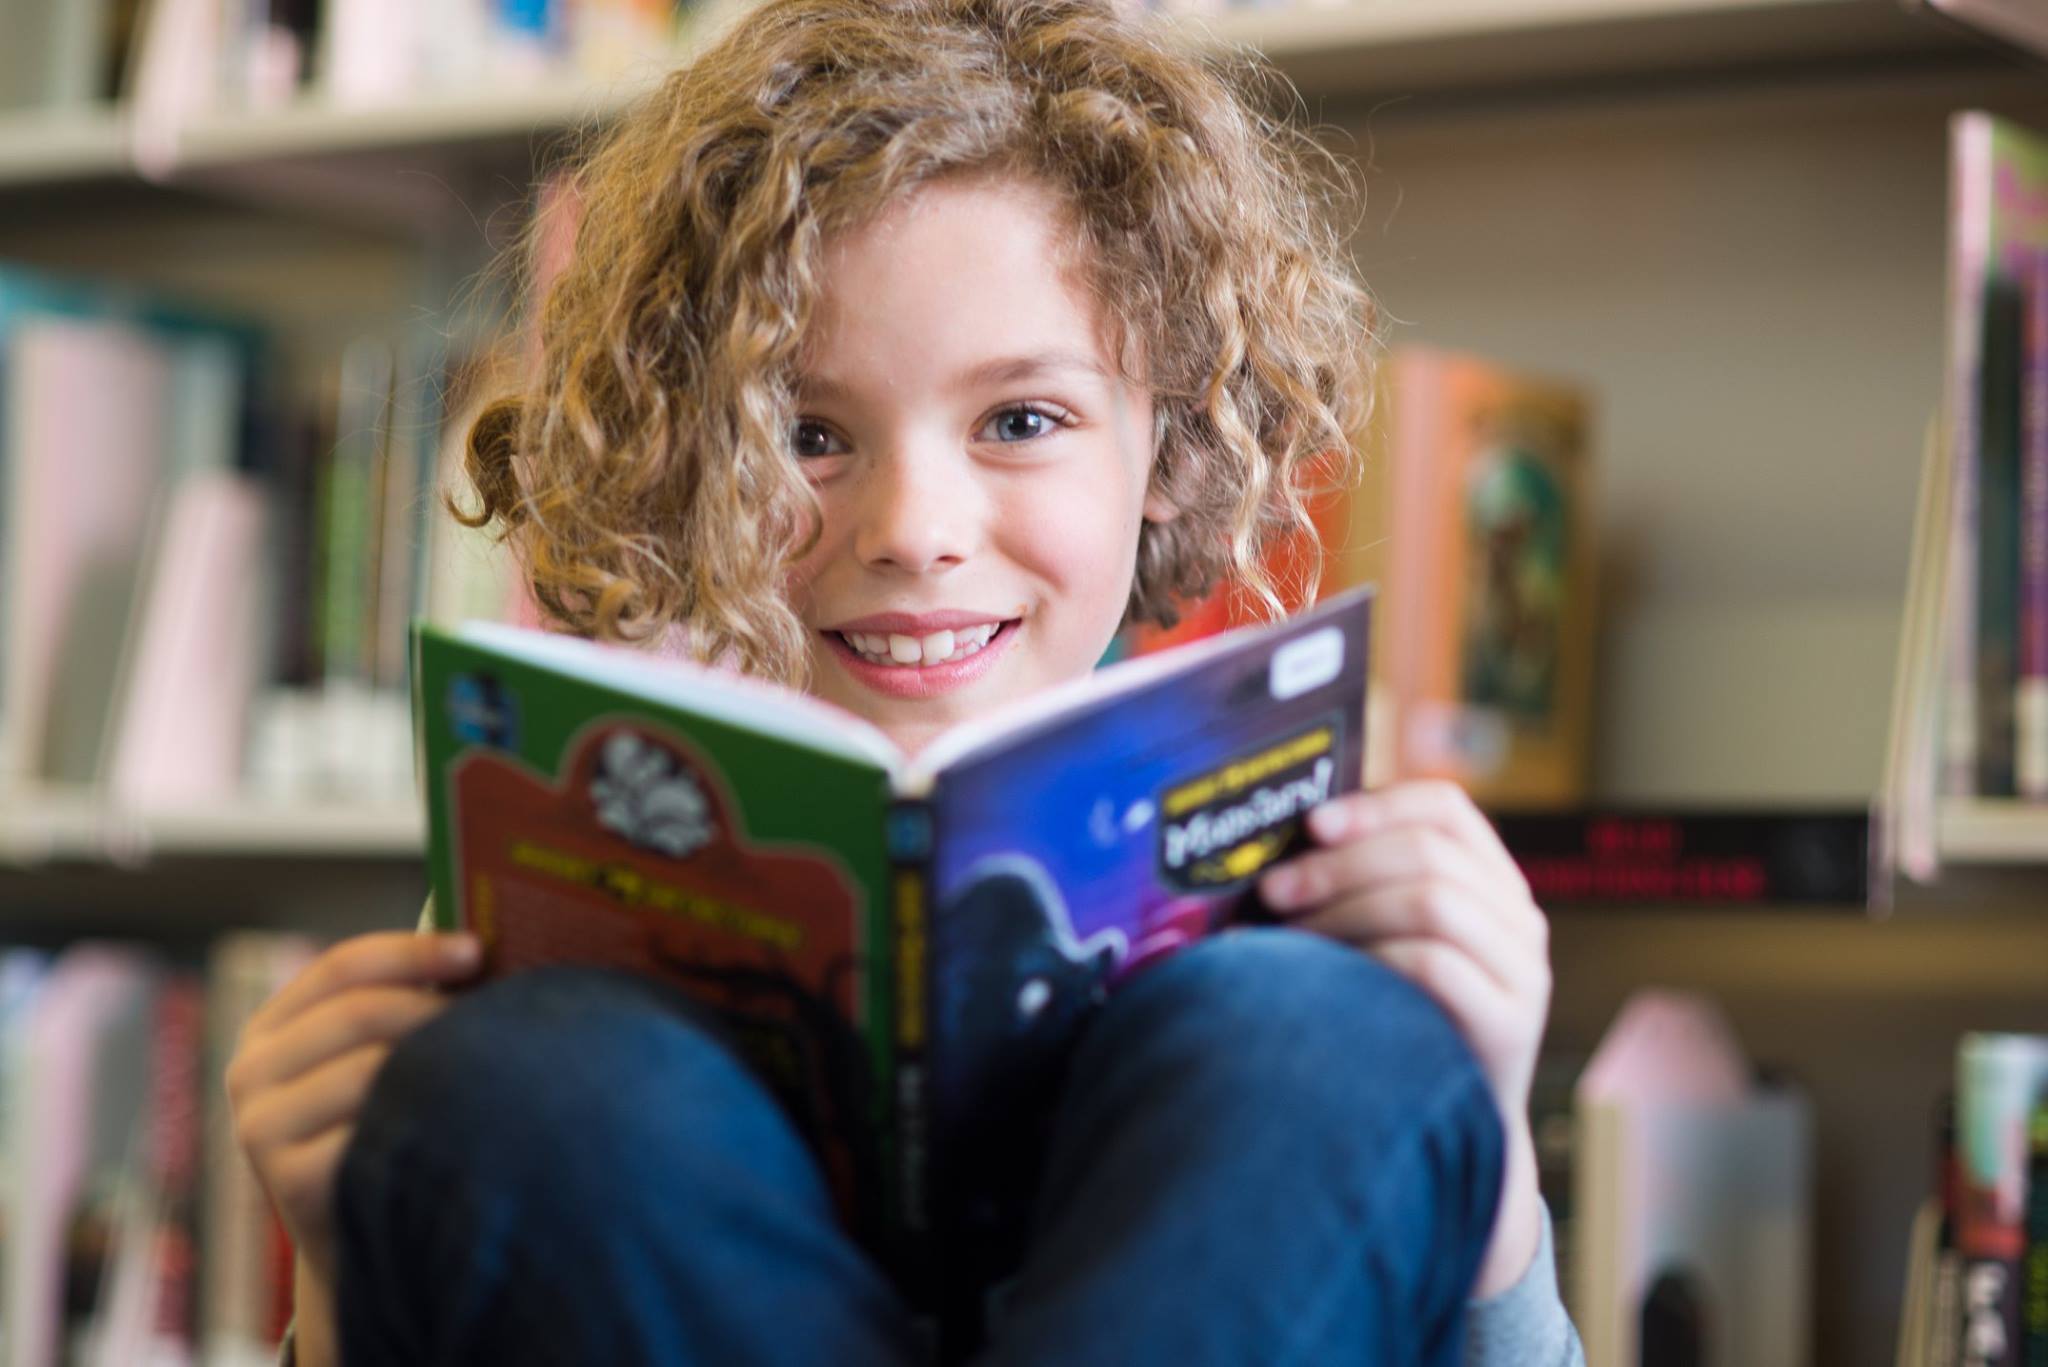 A child smiling and reading a book